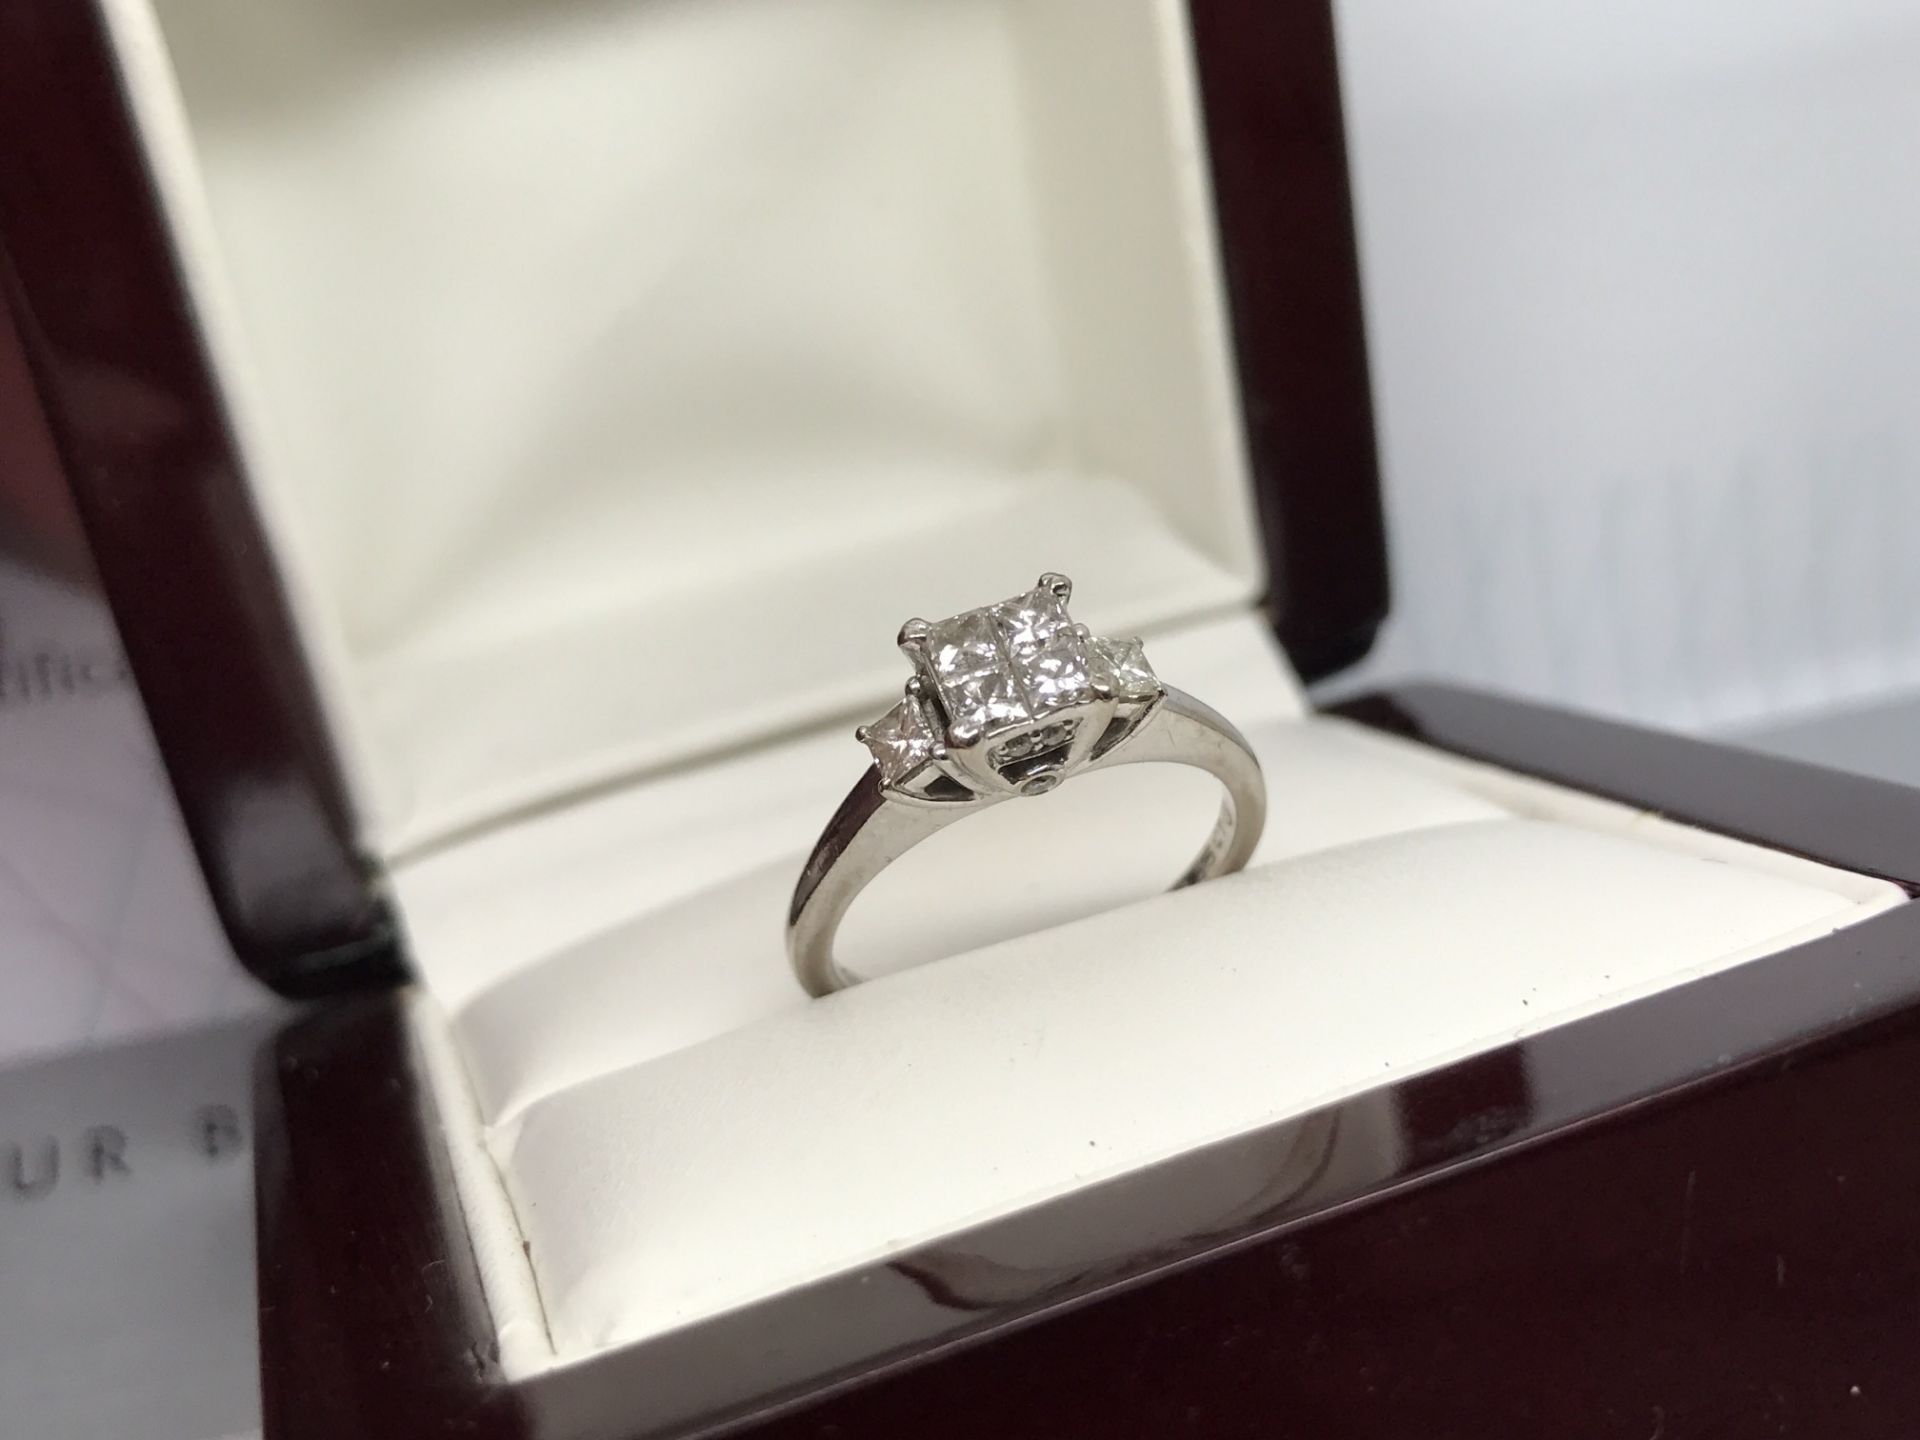 18ct GOLD DIAMOND RING COST £1850 WITH CERTIFICATE - Image 4 of 4